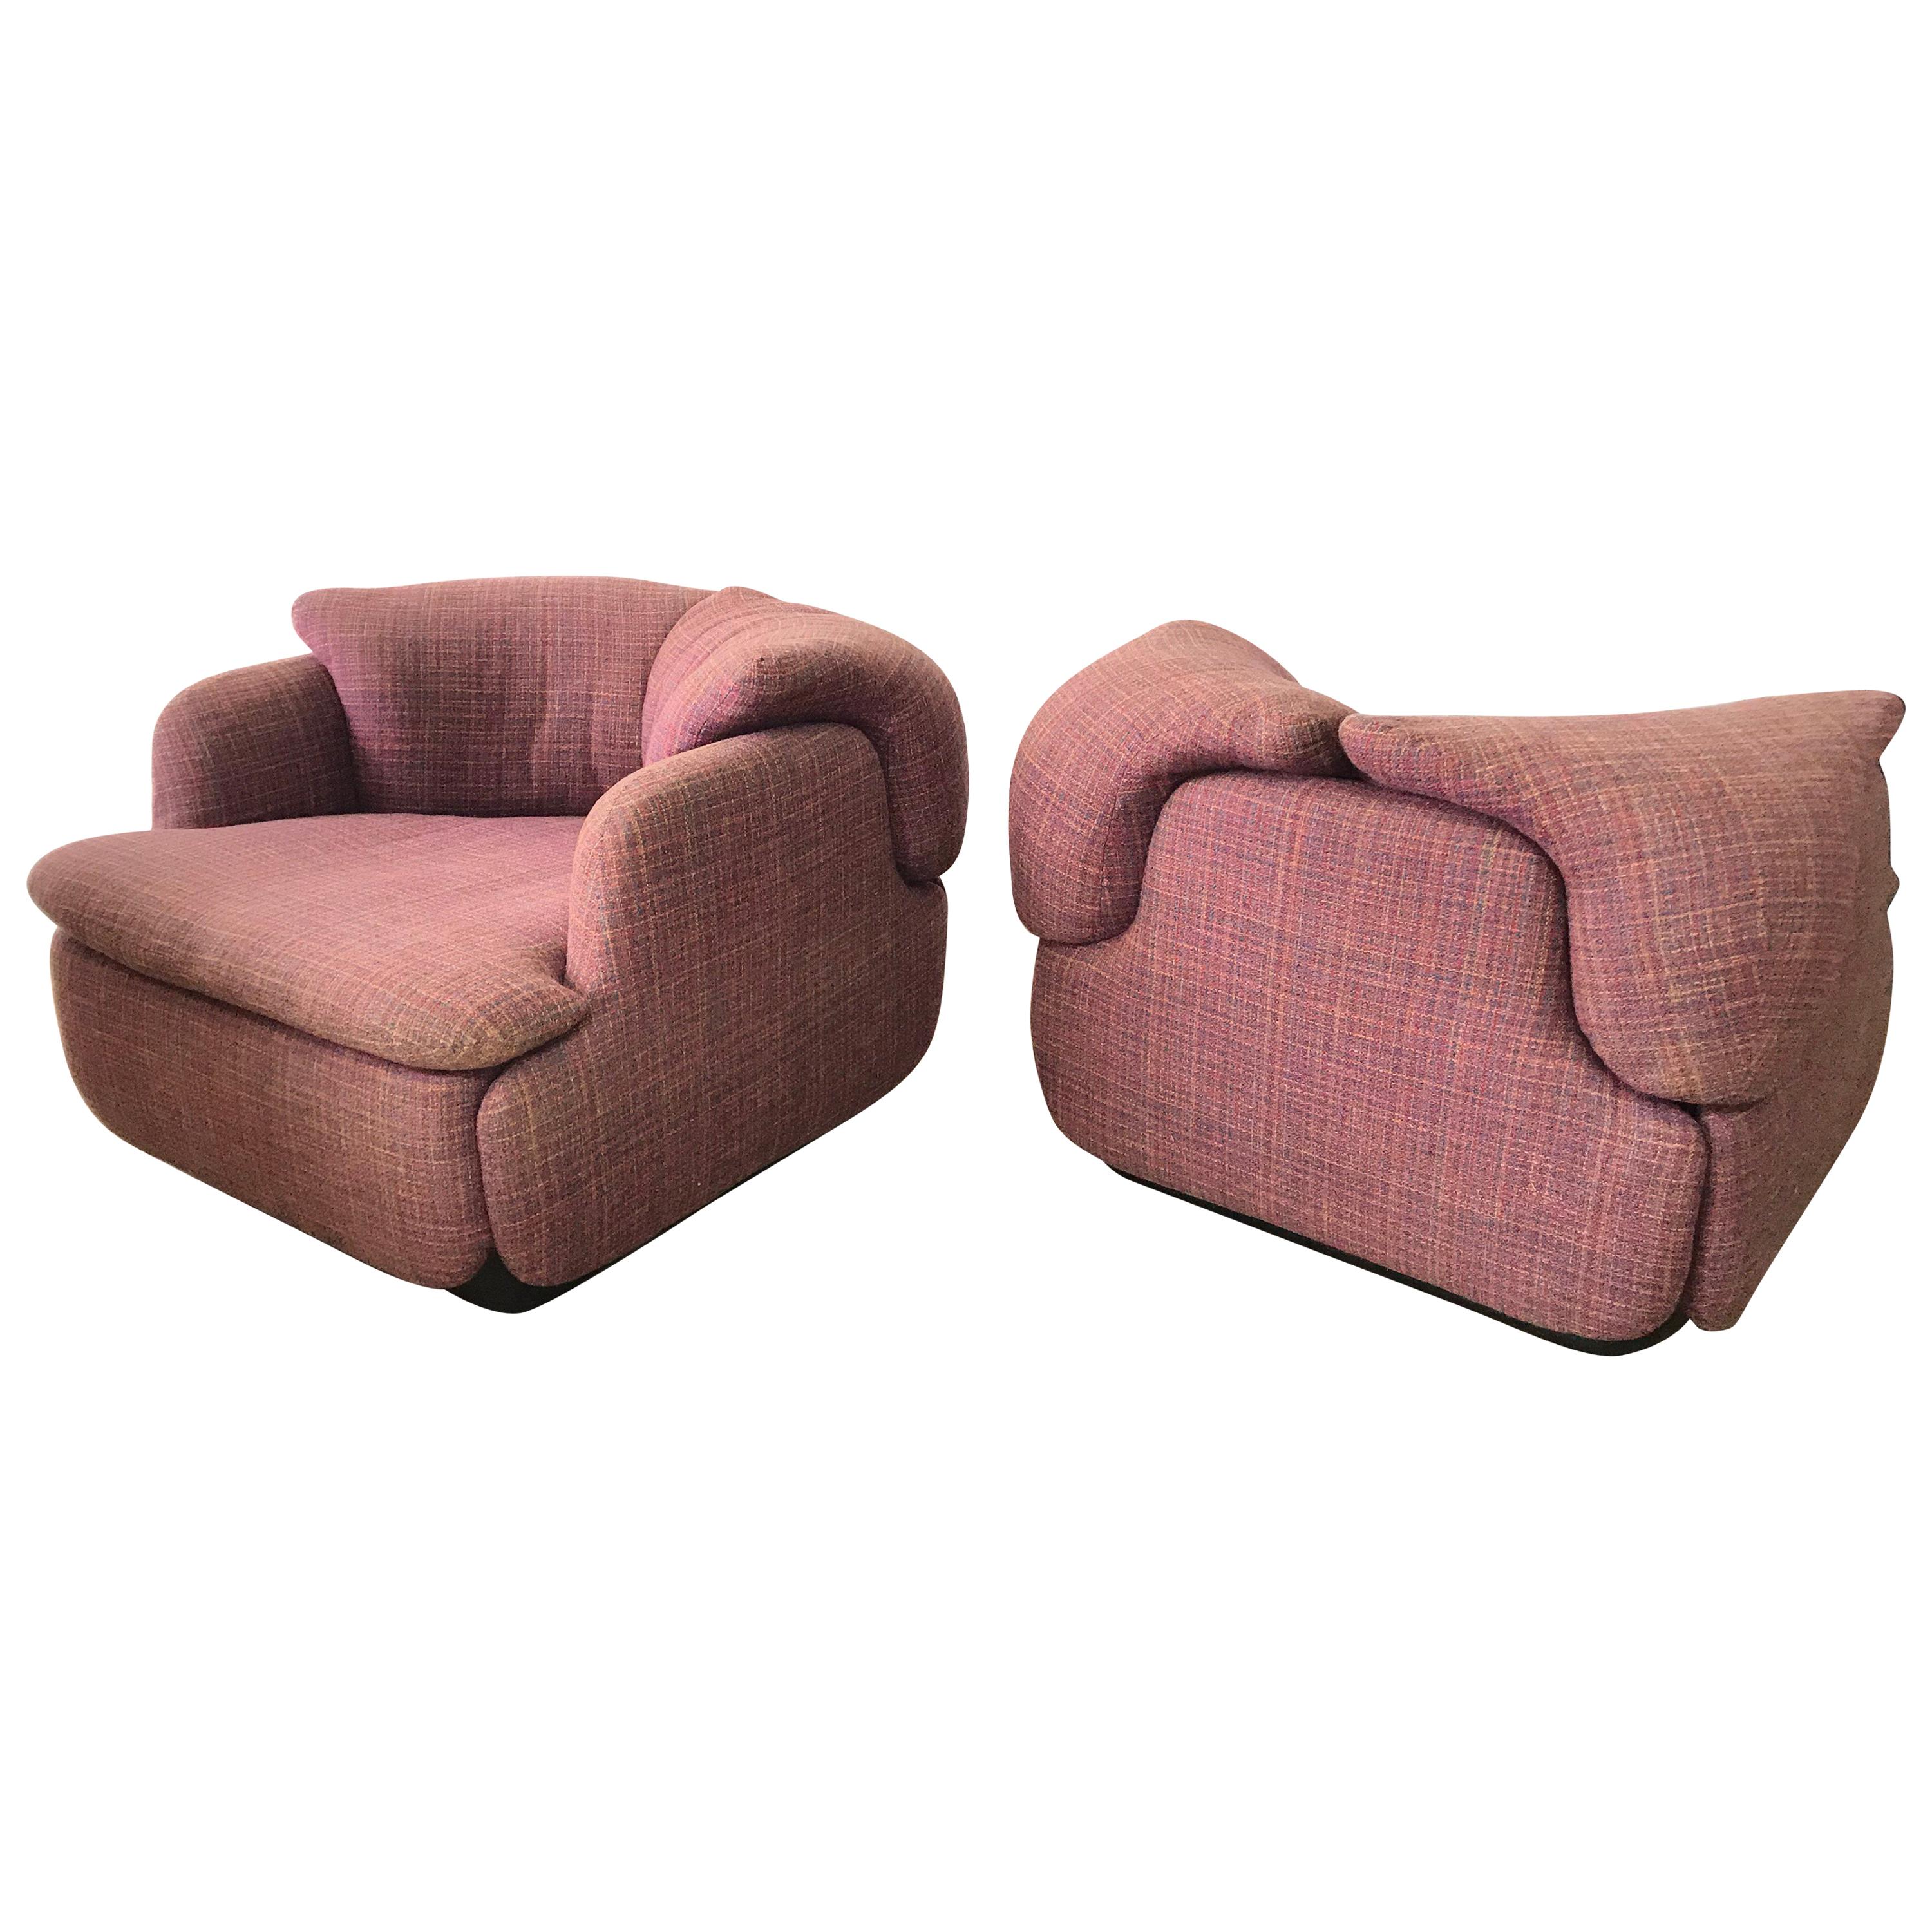 Pair of Pink Tweed “Confidential” Chairs by Alberto Rosselli for Saporiti Italia